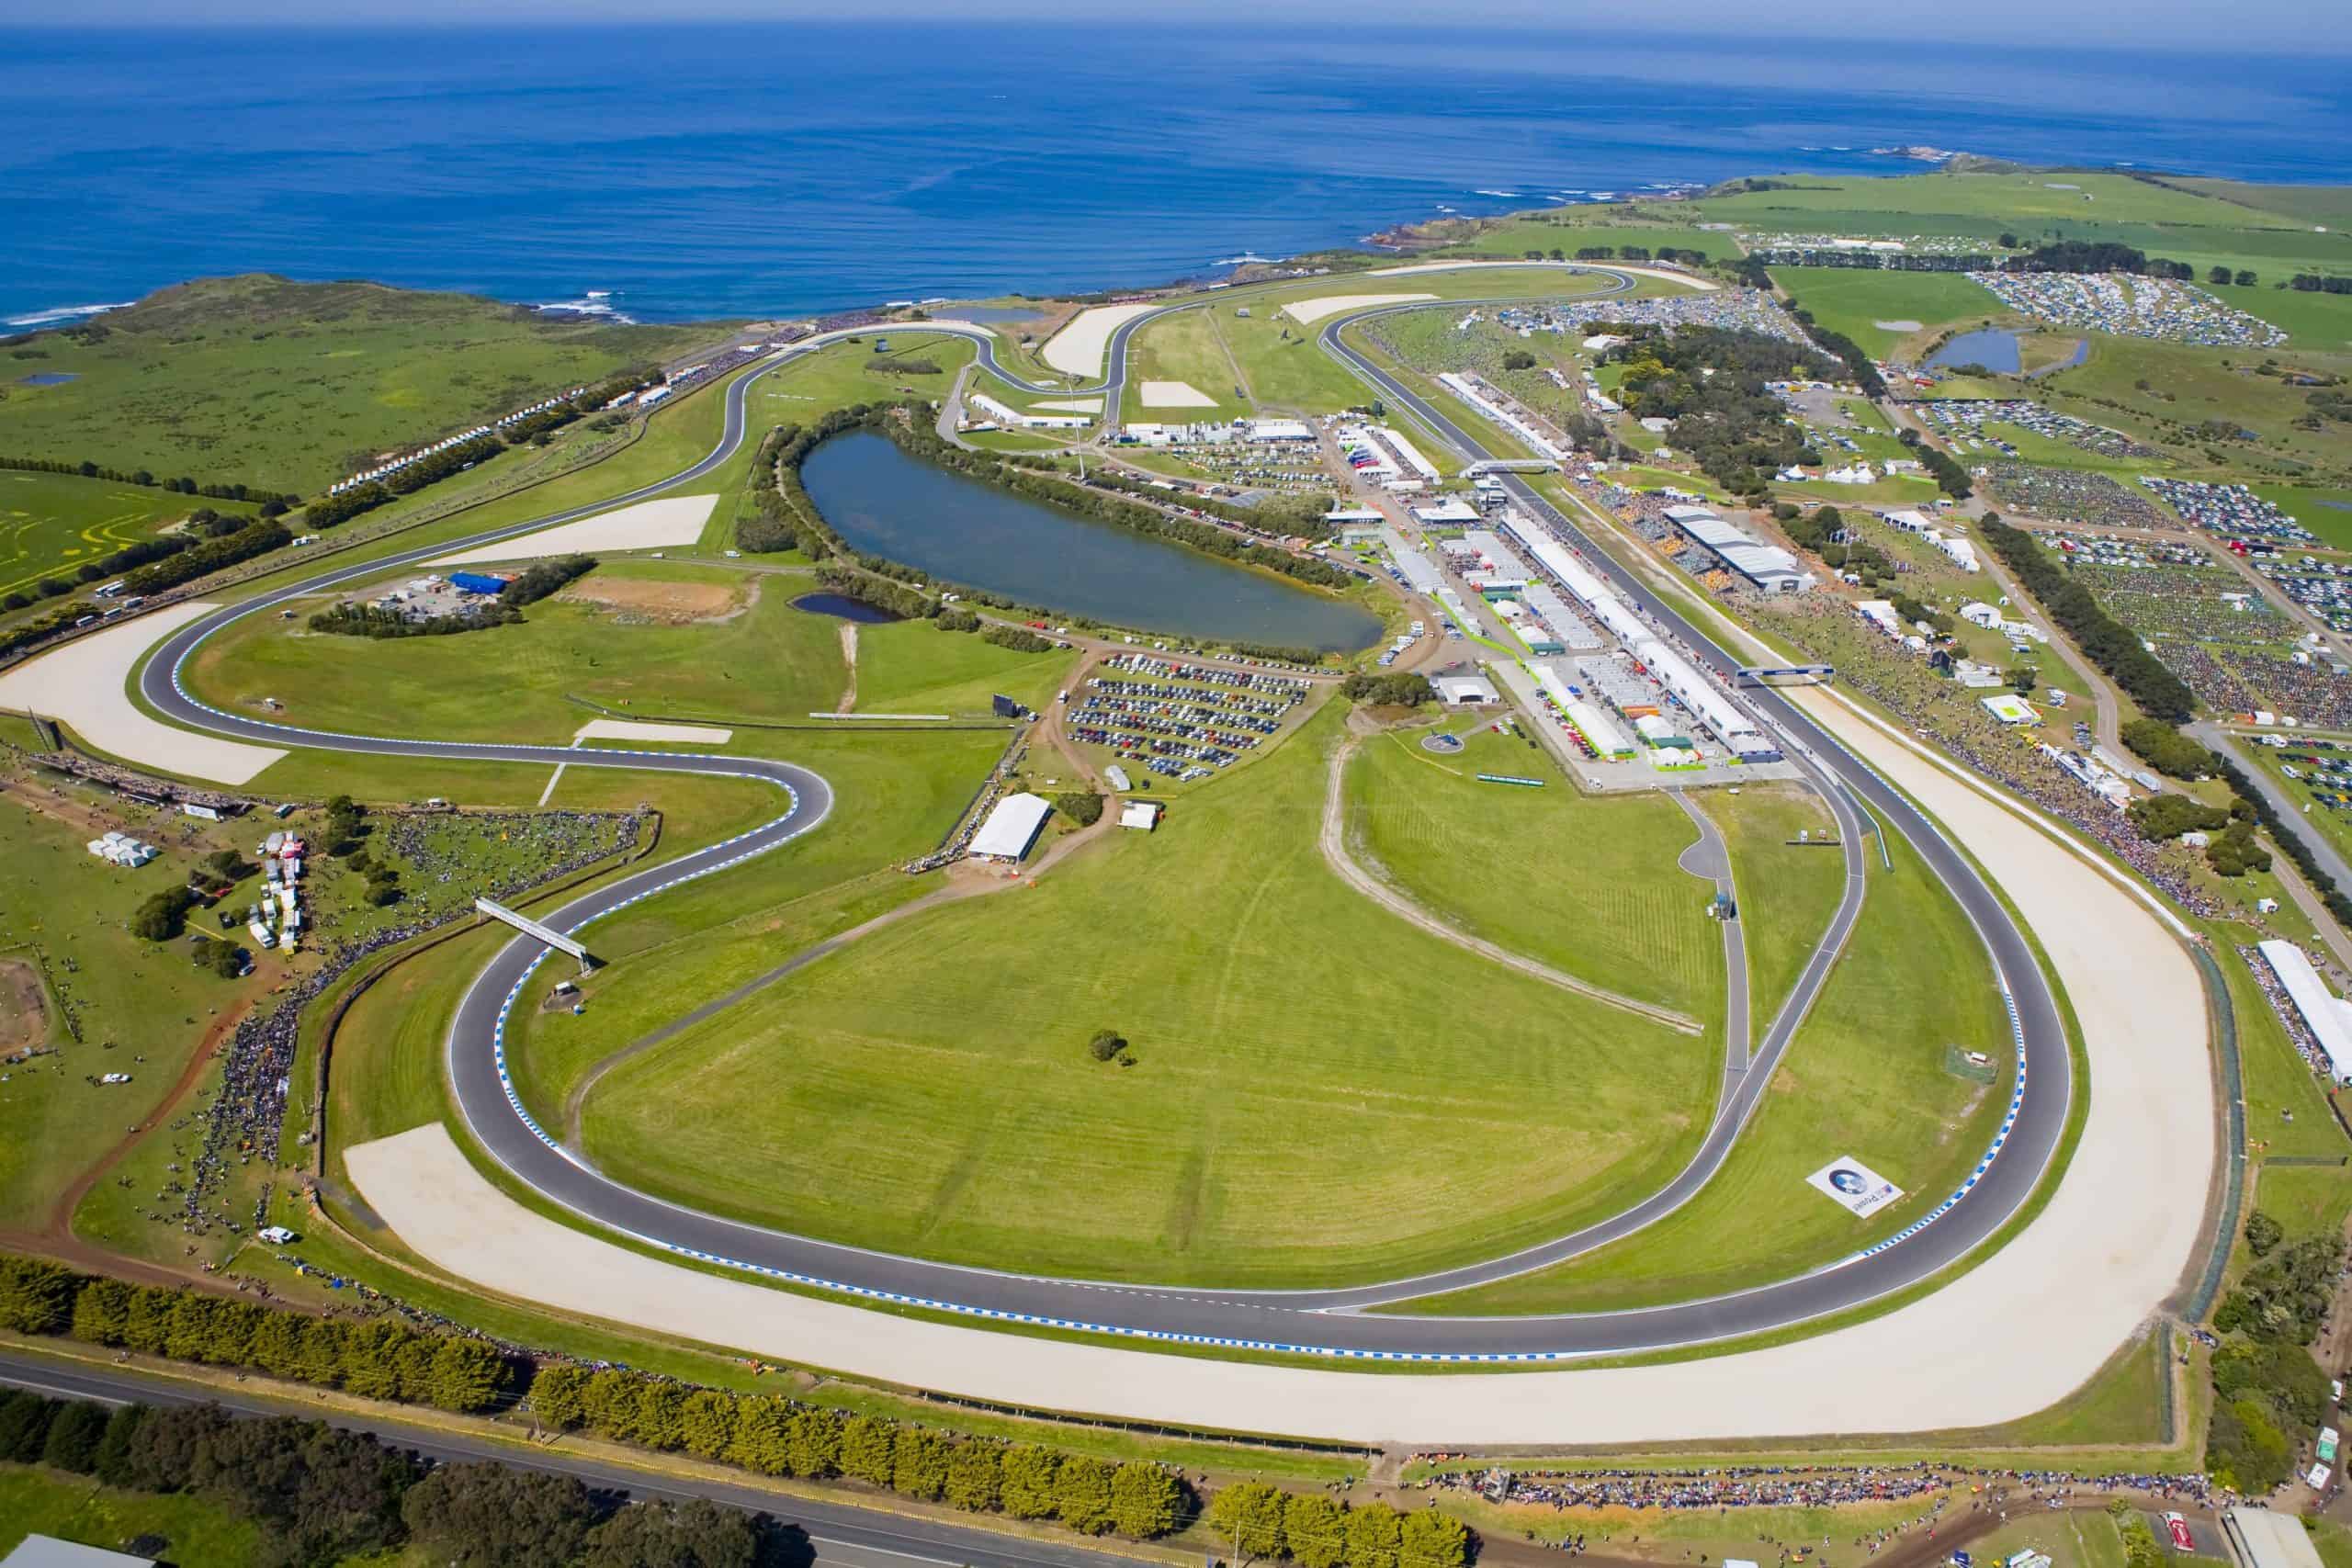 Tickets for Phillip Island 2 + 4 event on sale now SpeedSeries